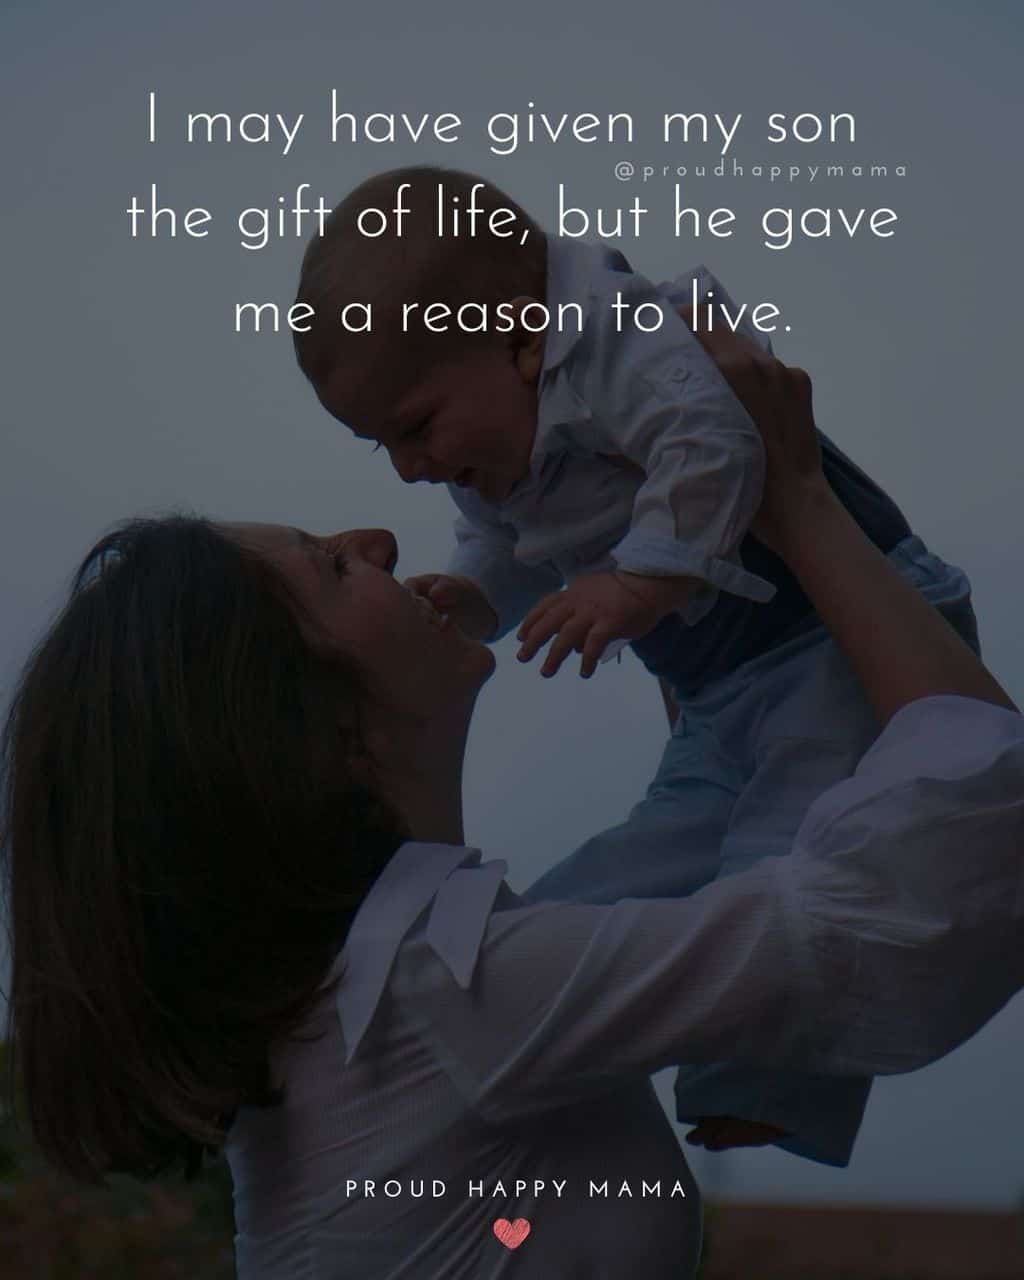 Son Quotes - I may have given my son the gift of life, but he gave me a reason to live.’